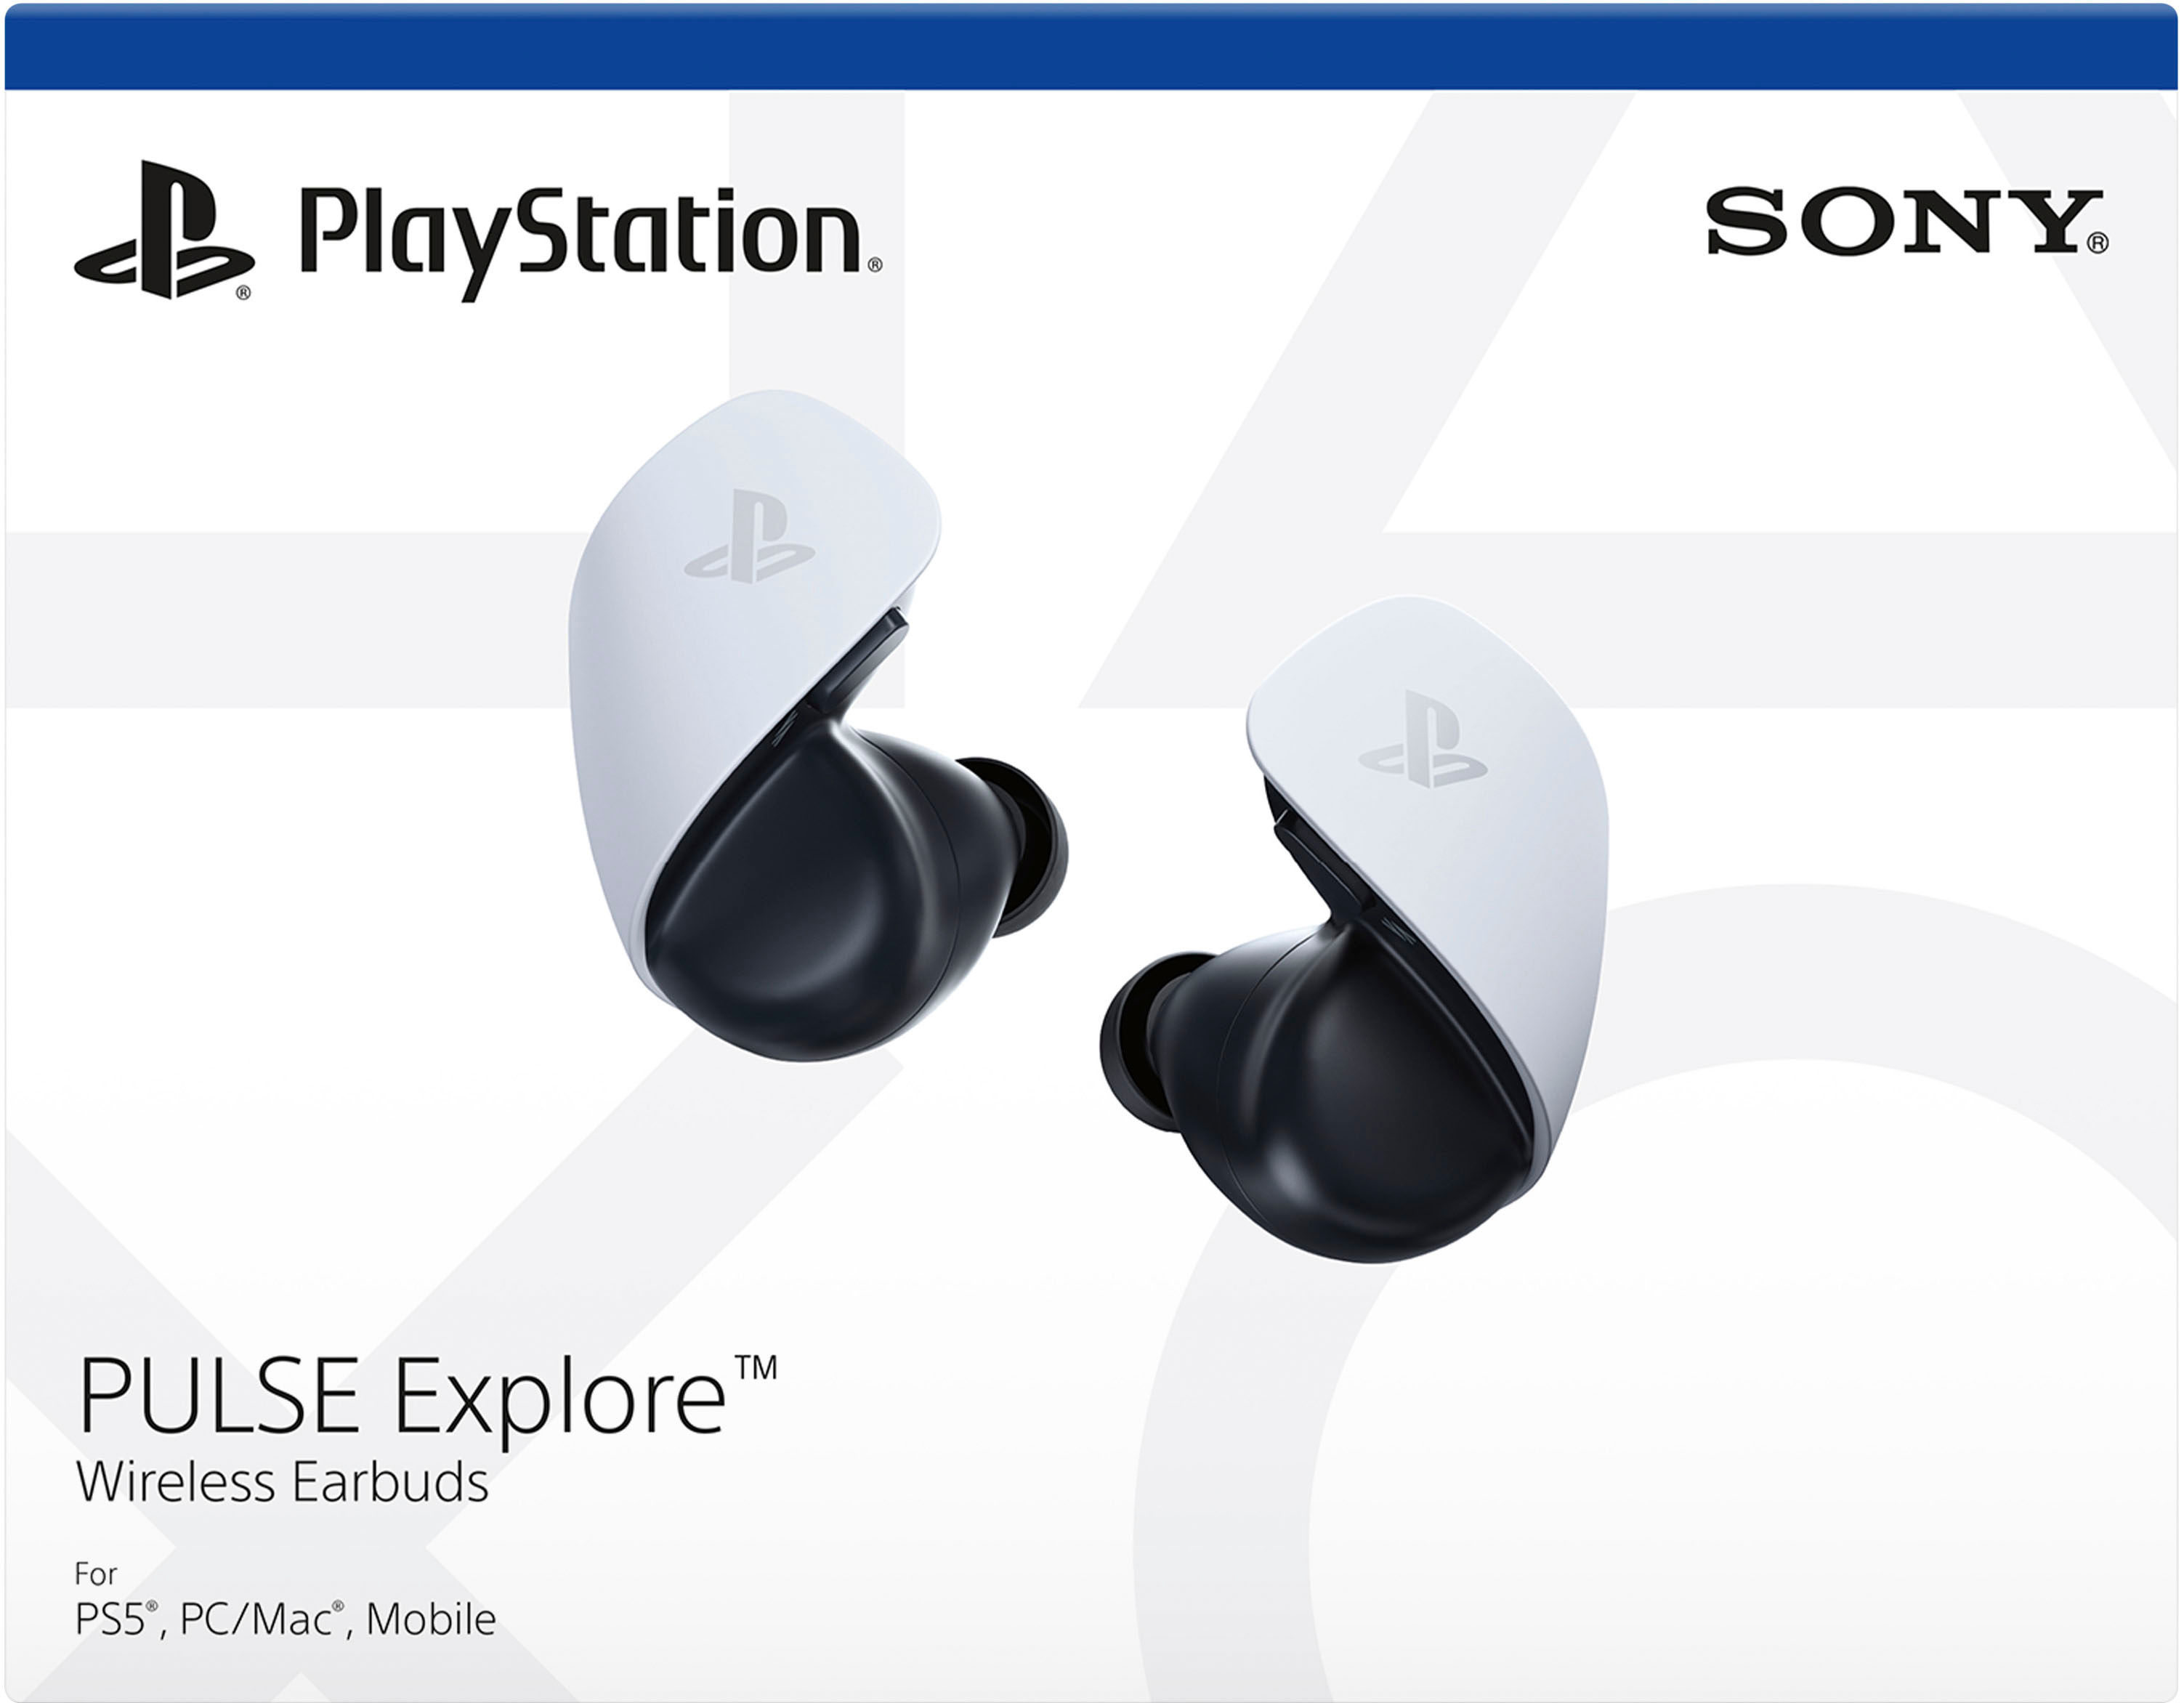 Sony Interactive Entertainment PULSE Explore wireless earbuds